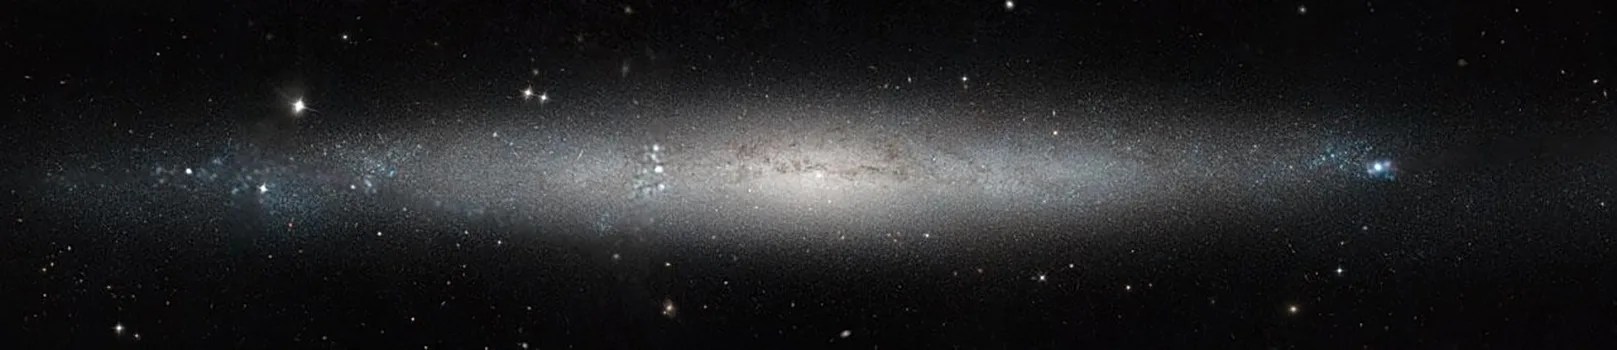 Long thin galaxy view, nearly from the side but tilted a bit toward the viewer. Lots of white stars throughout, but they get thicker and brighter near the center.